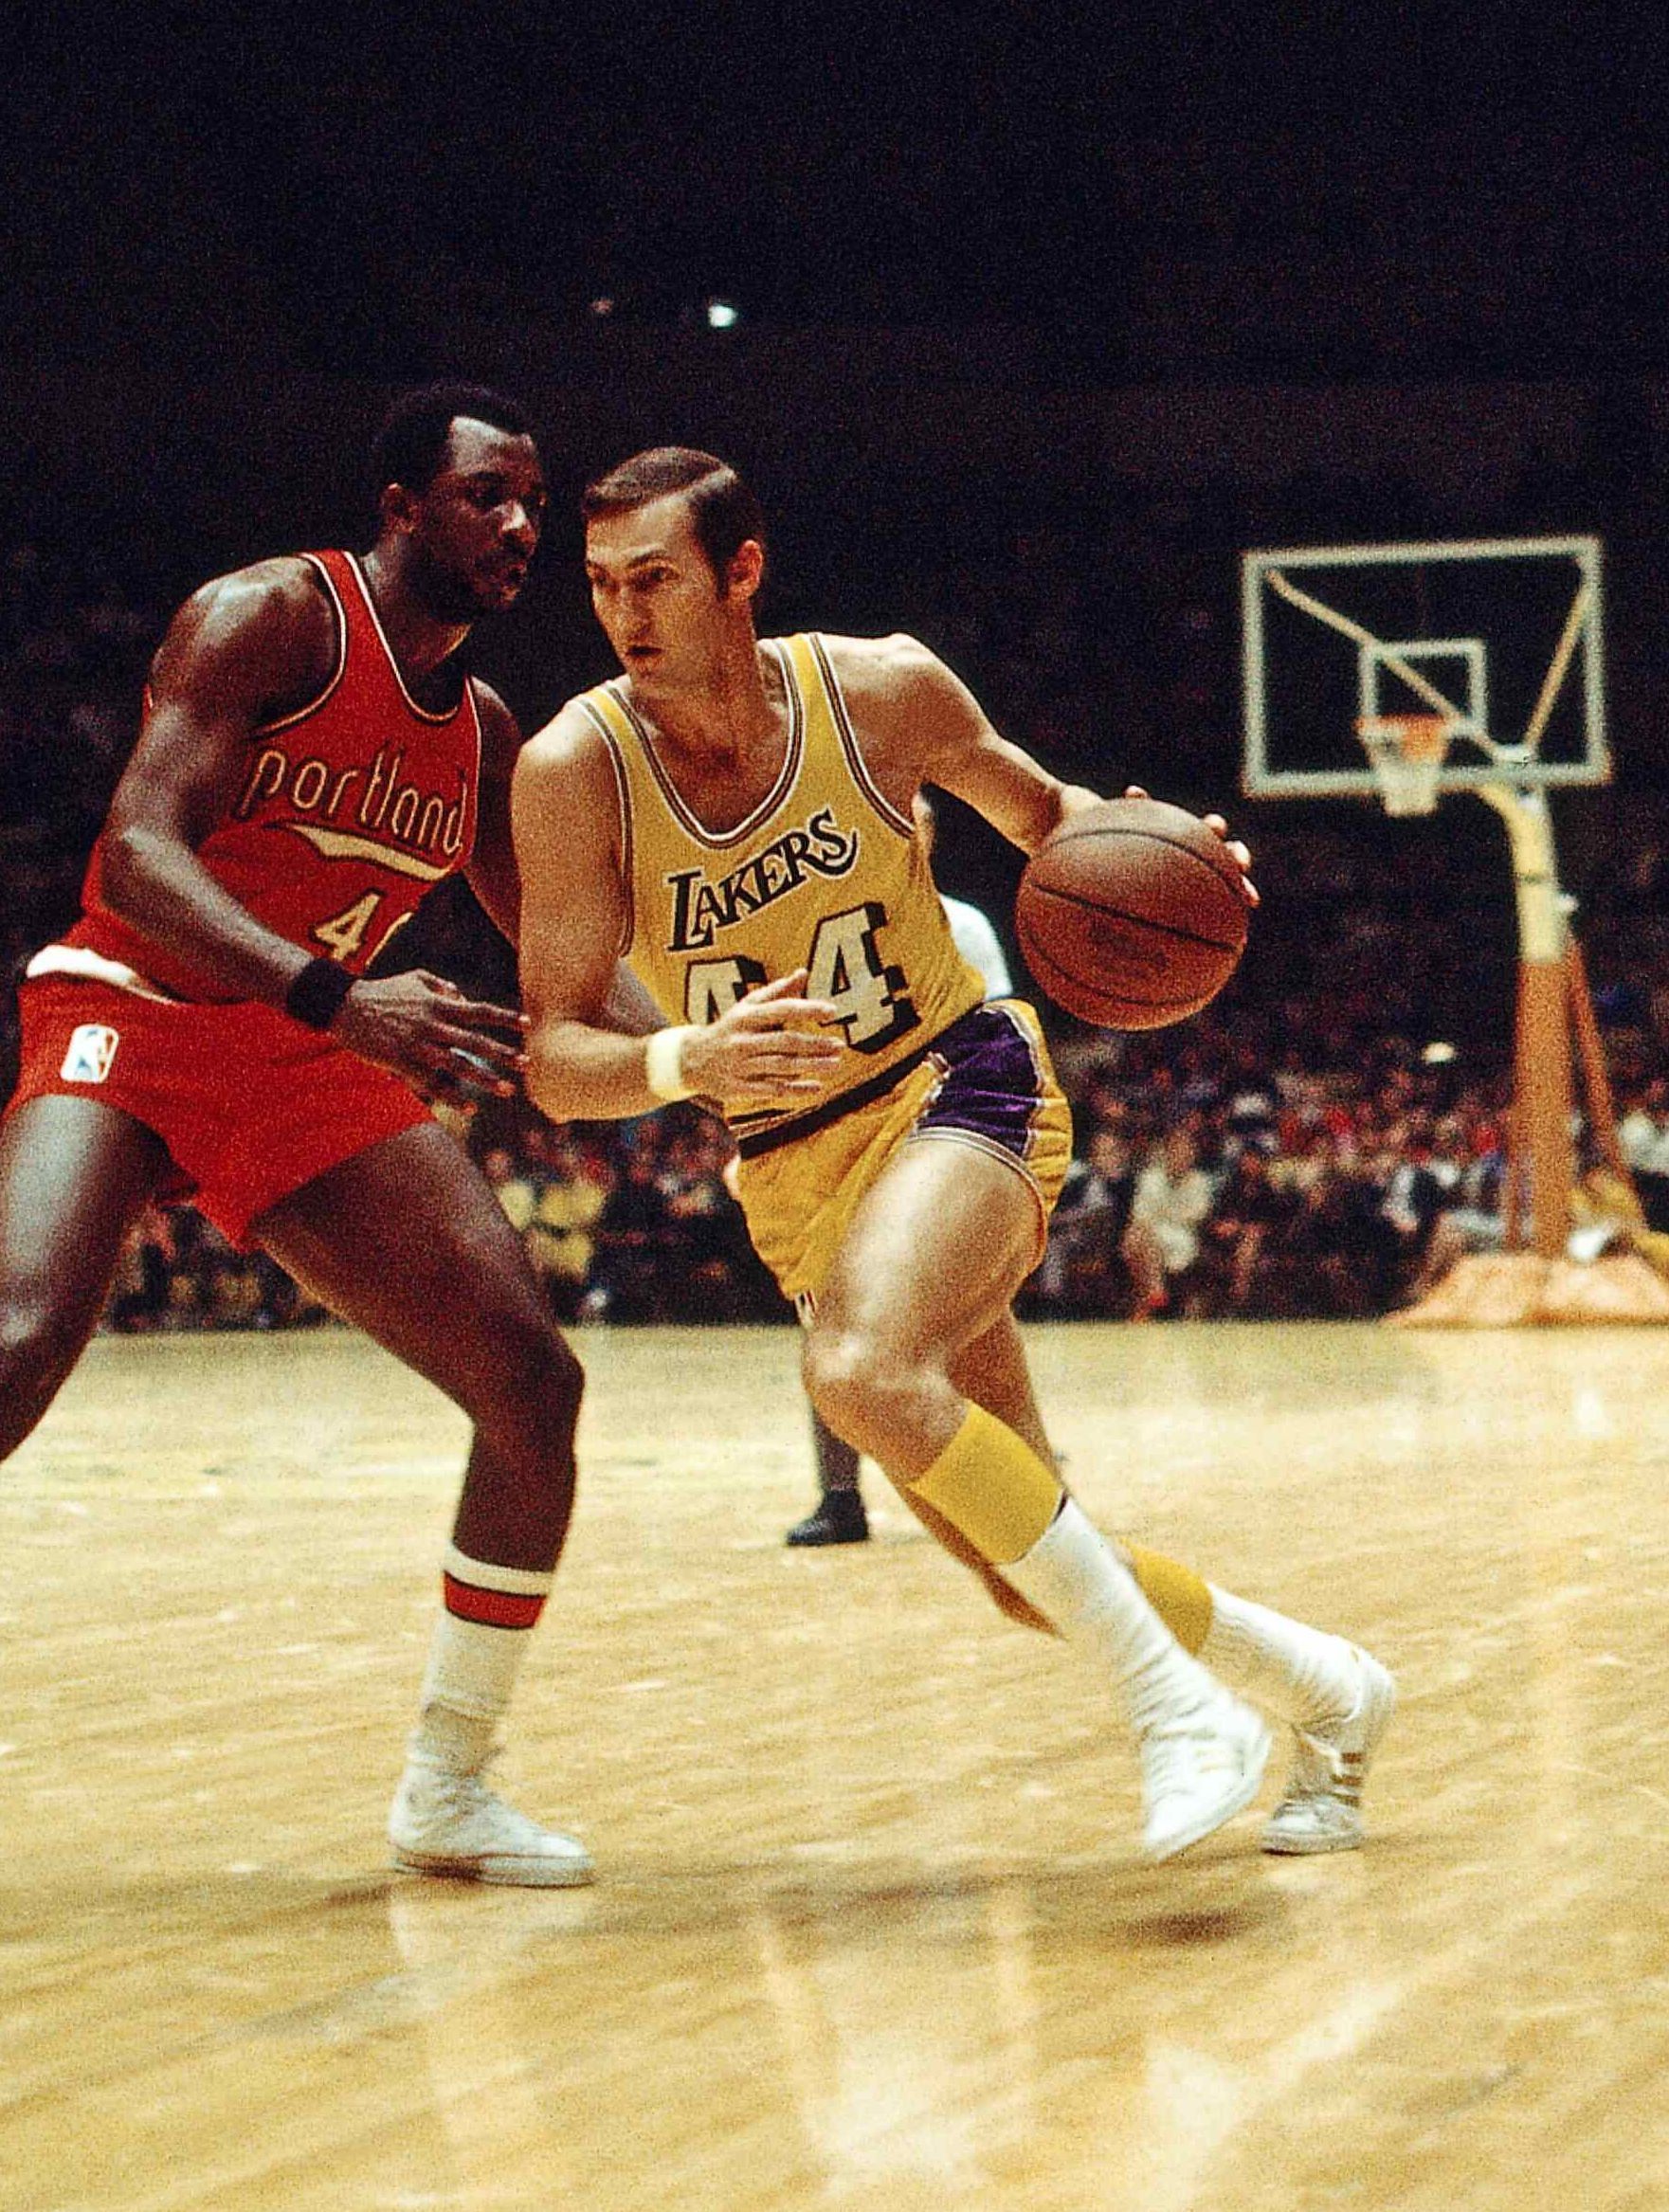 Jerry West dribbling the ball up the court in a game against the Portland Trailblazers. - NBA